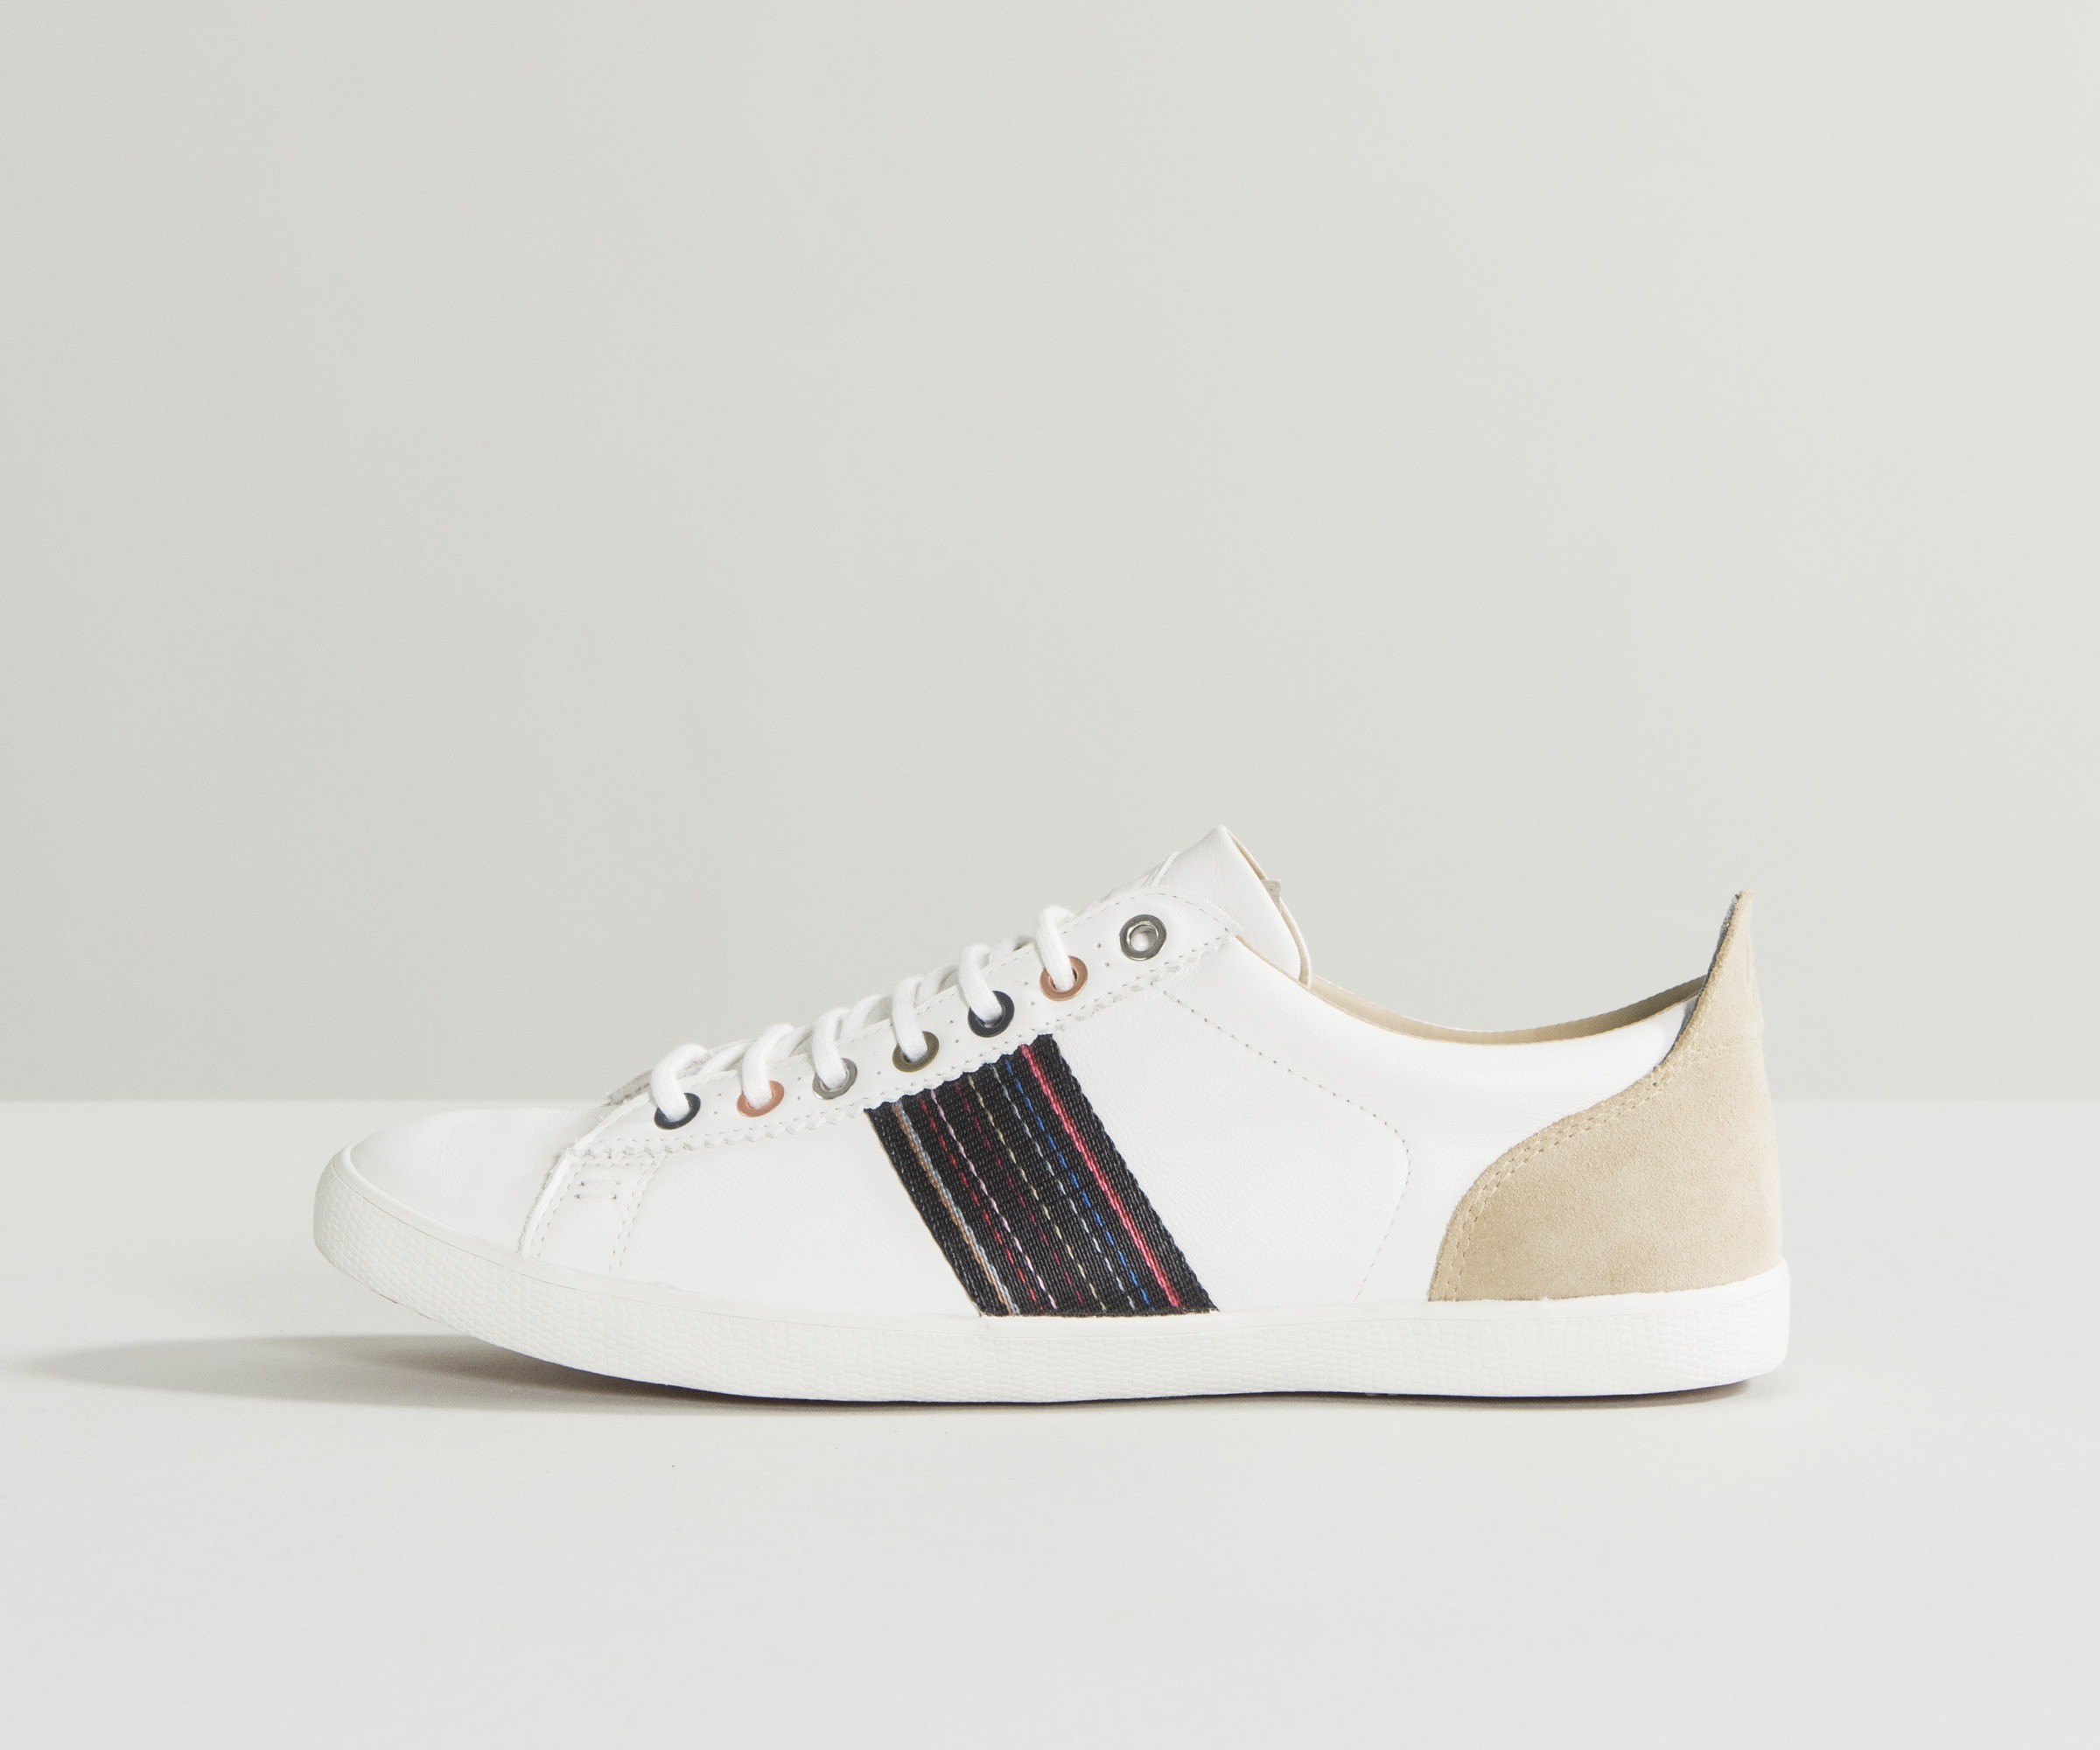 Paul Smith Shoes 'Osmo' Leather Pump With Side Stripe White